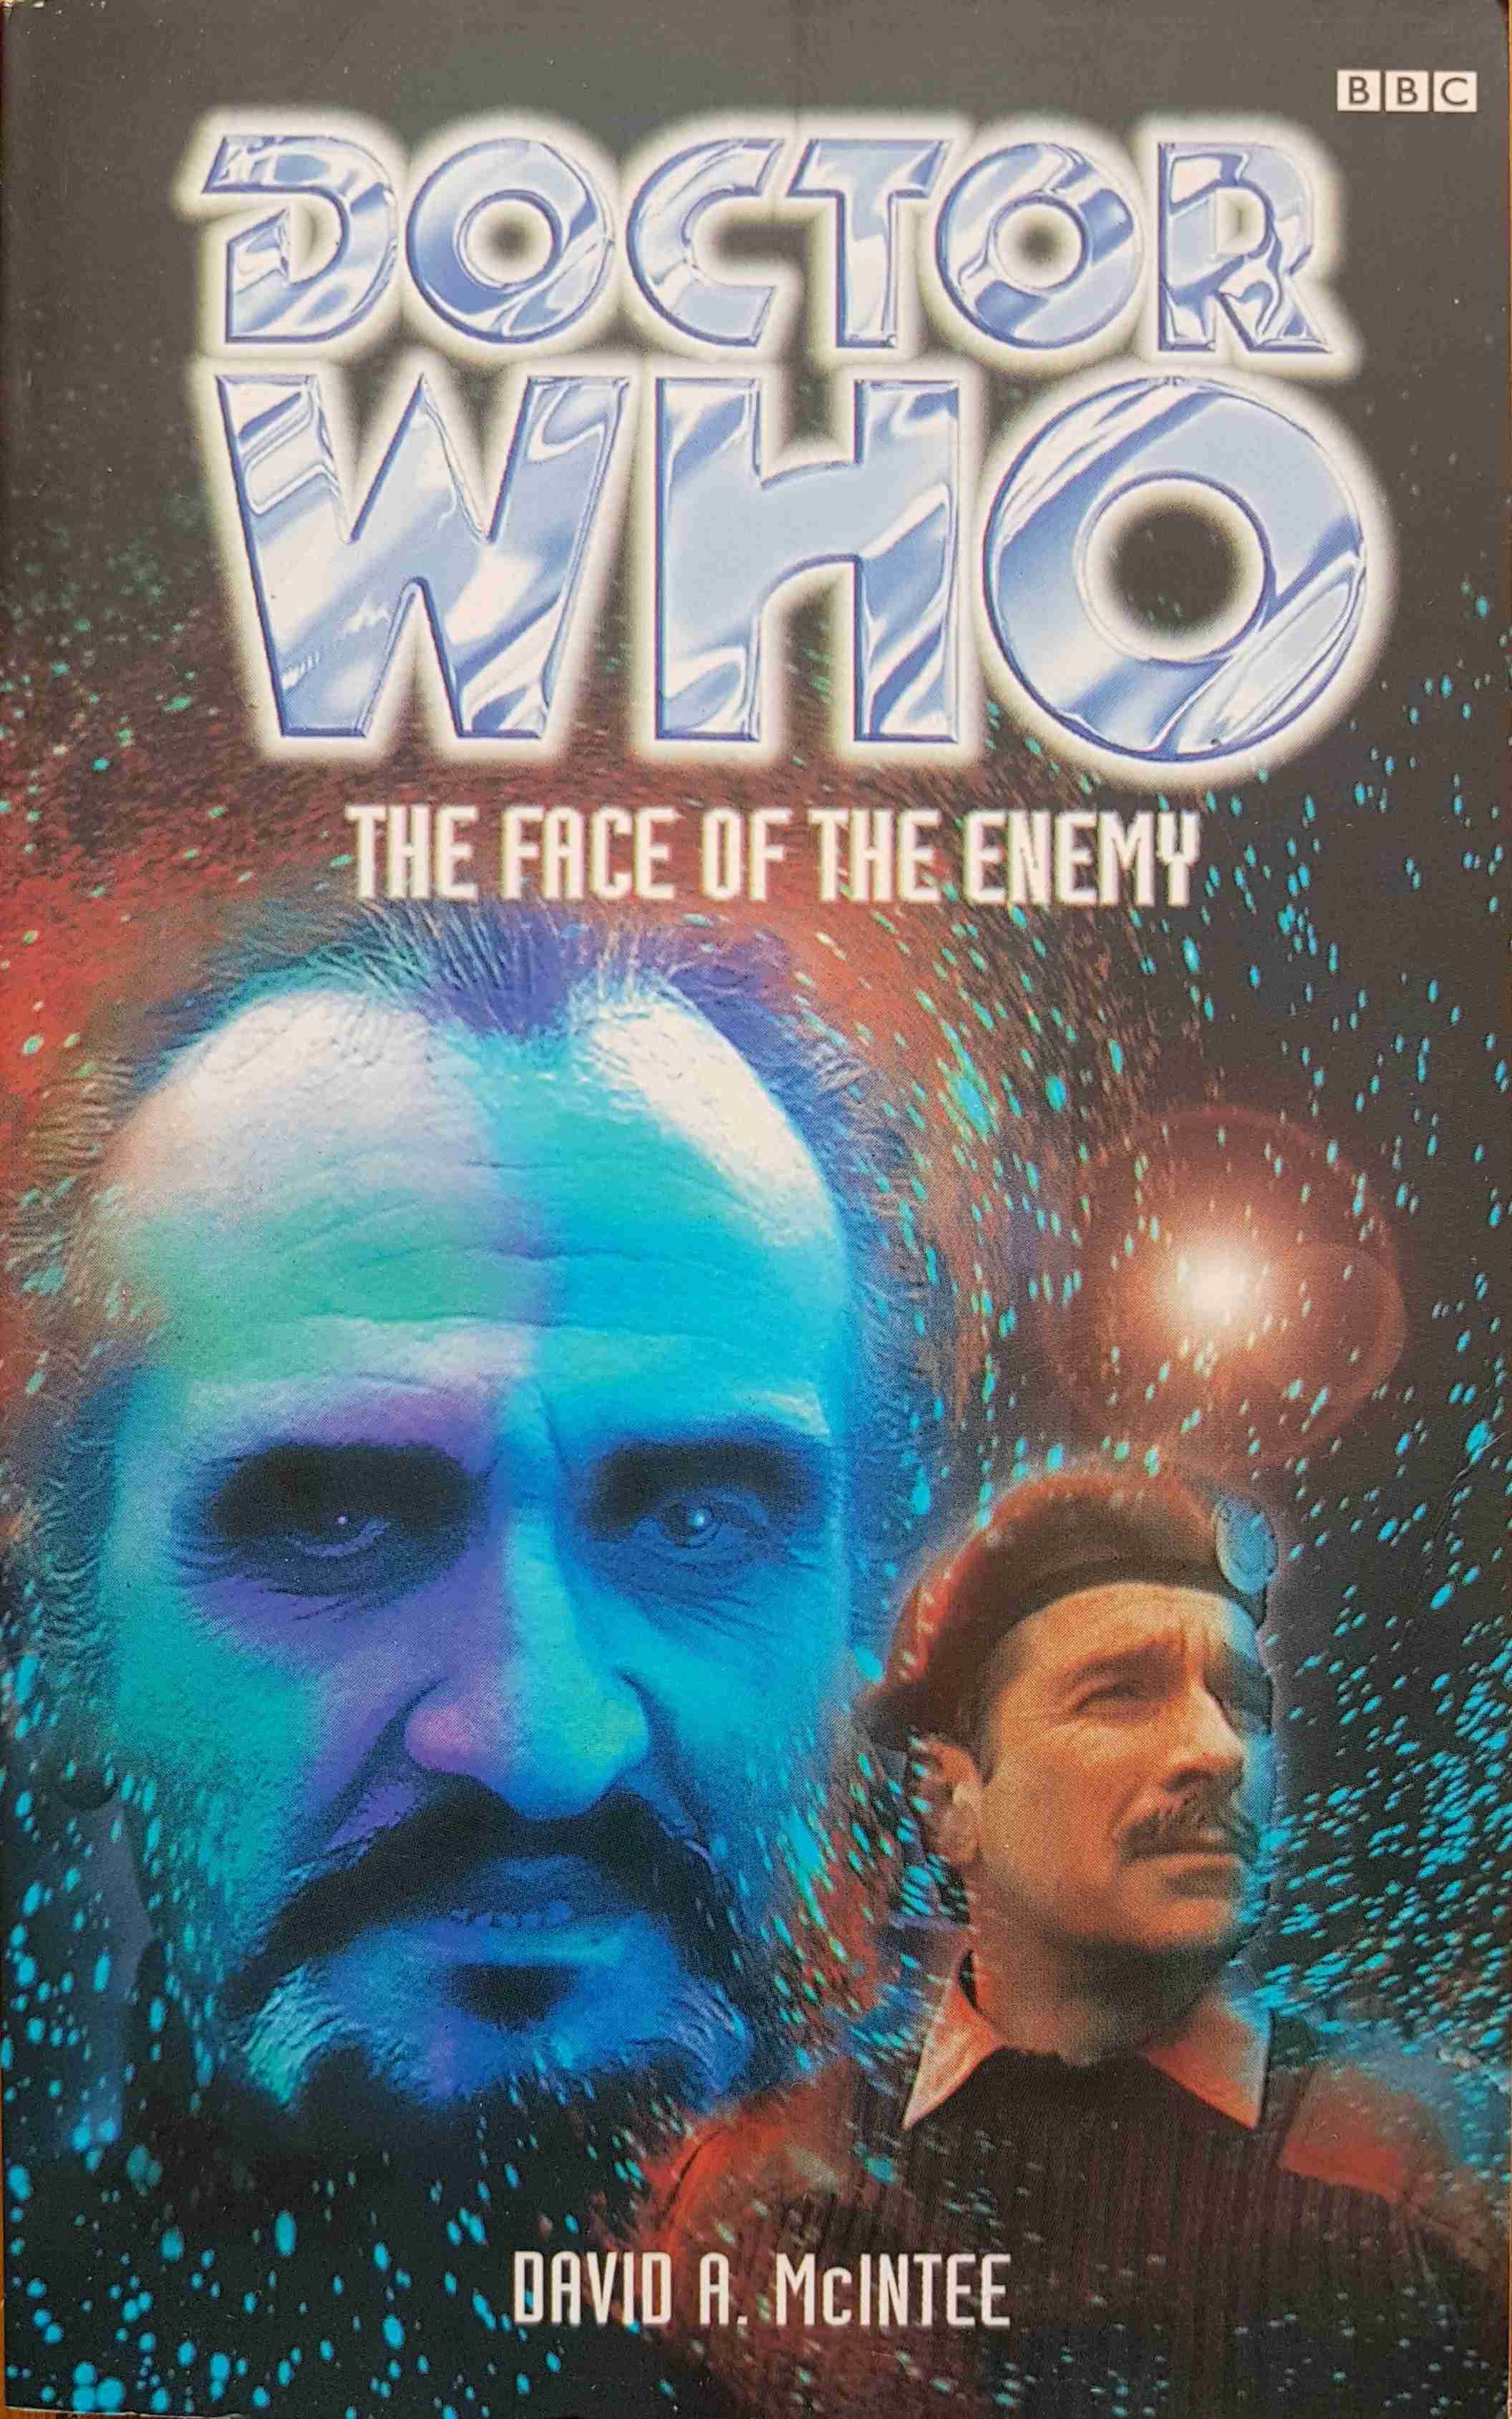 Picture of Doctor Who - The face of the enemy by artist David A. McIntee from the BBC books - Records and Tapes library